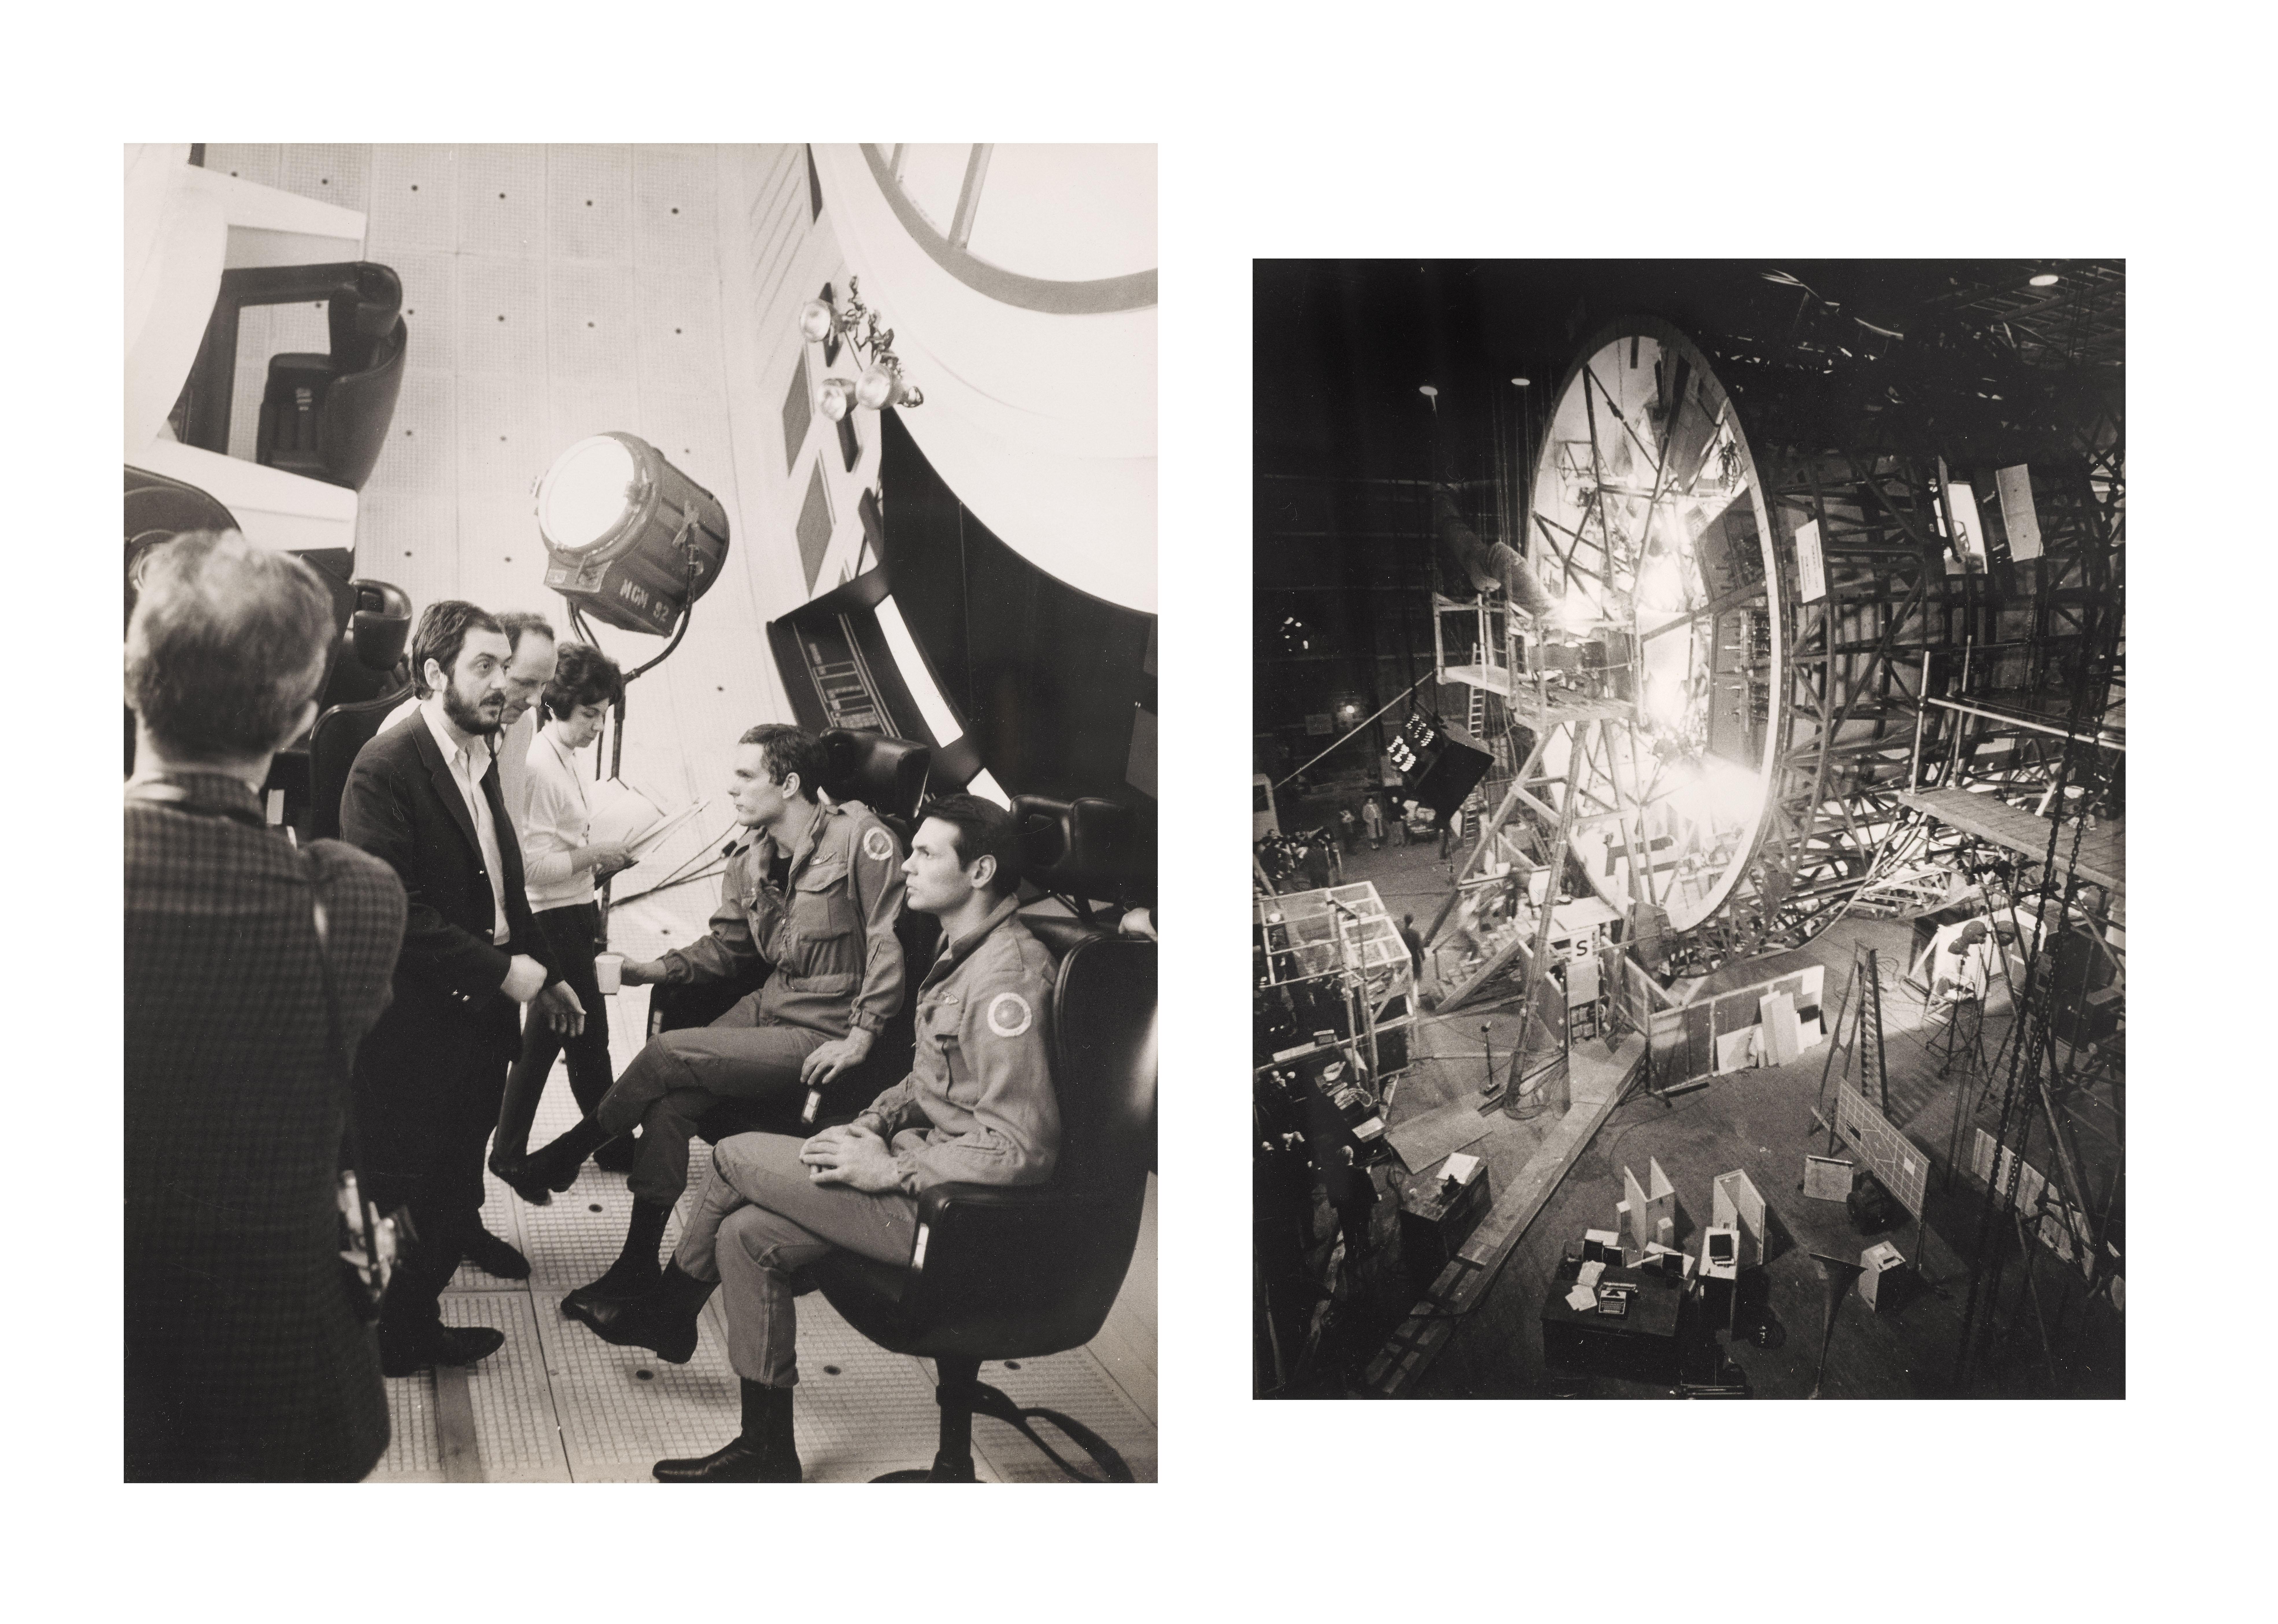 2 Original double weight candid photographs for Stanley Kubrick's landmark science fiction film that is still considered one of the most influential sci-fi films of all time. (one oversized and one regular size ) The large oversized still is 14 1/4